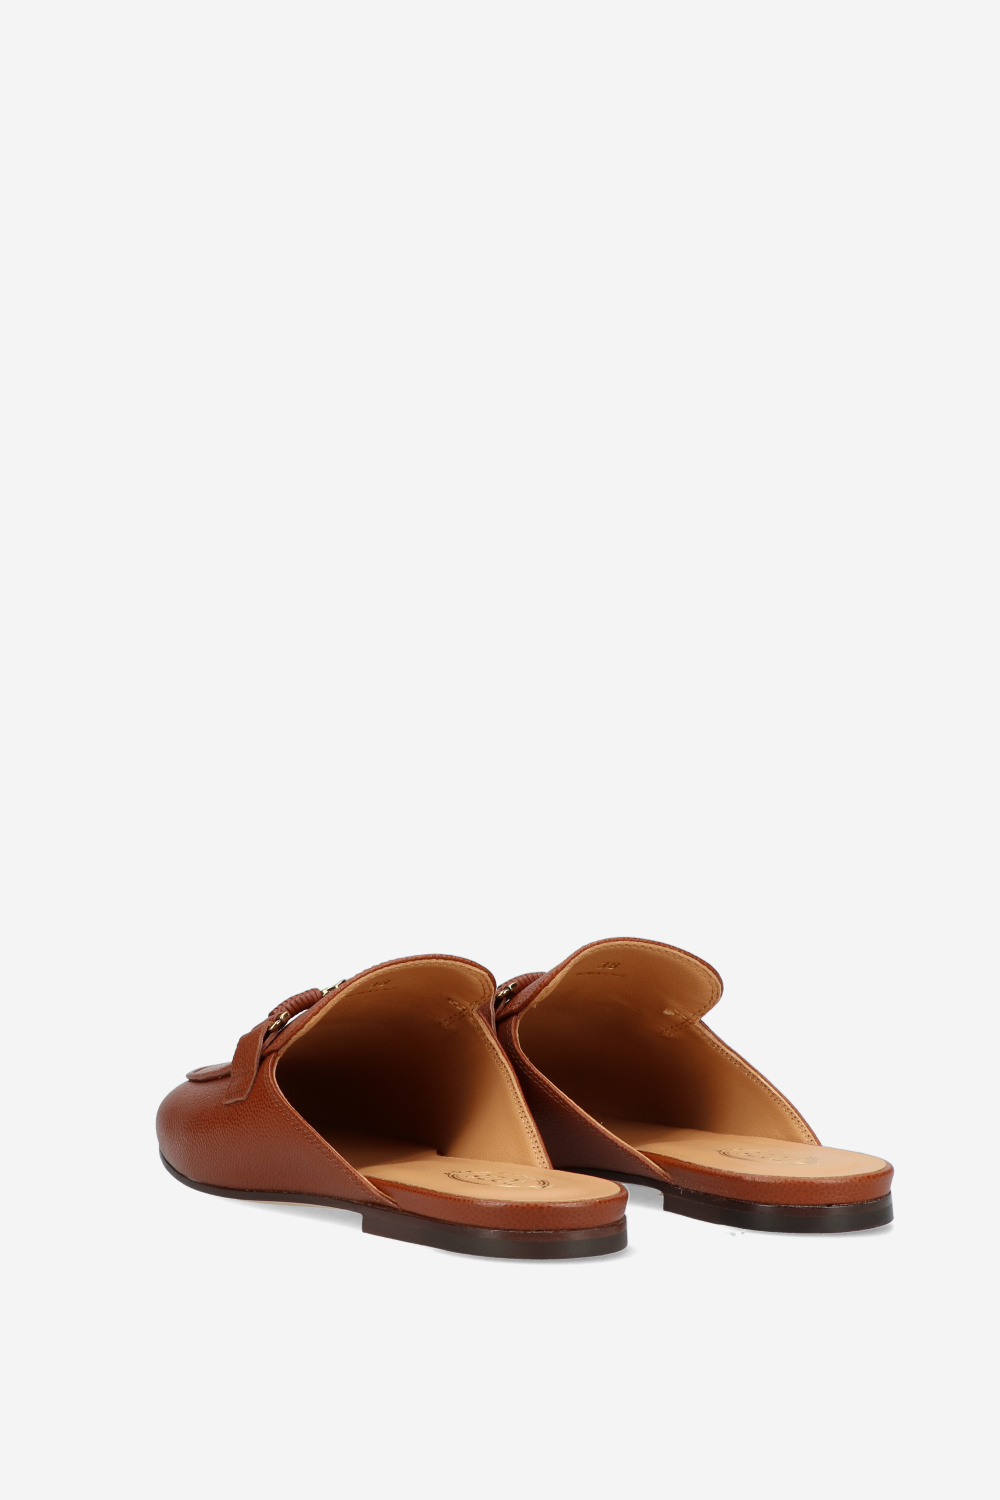 Tods Mules Brown